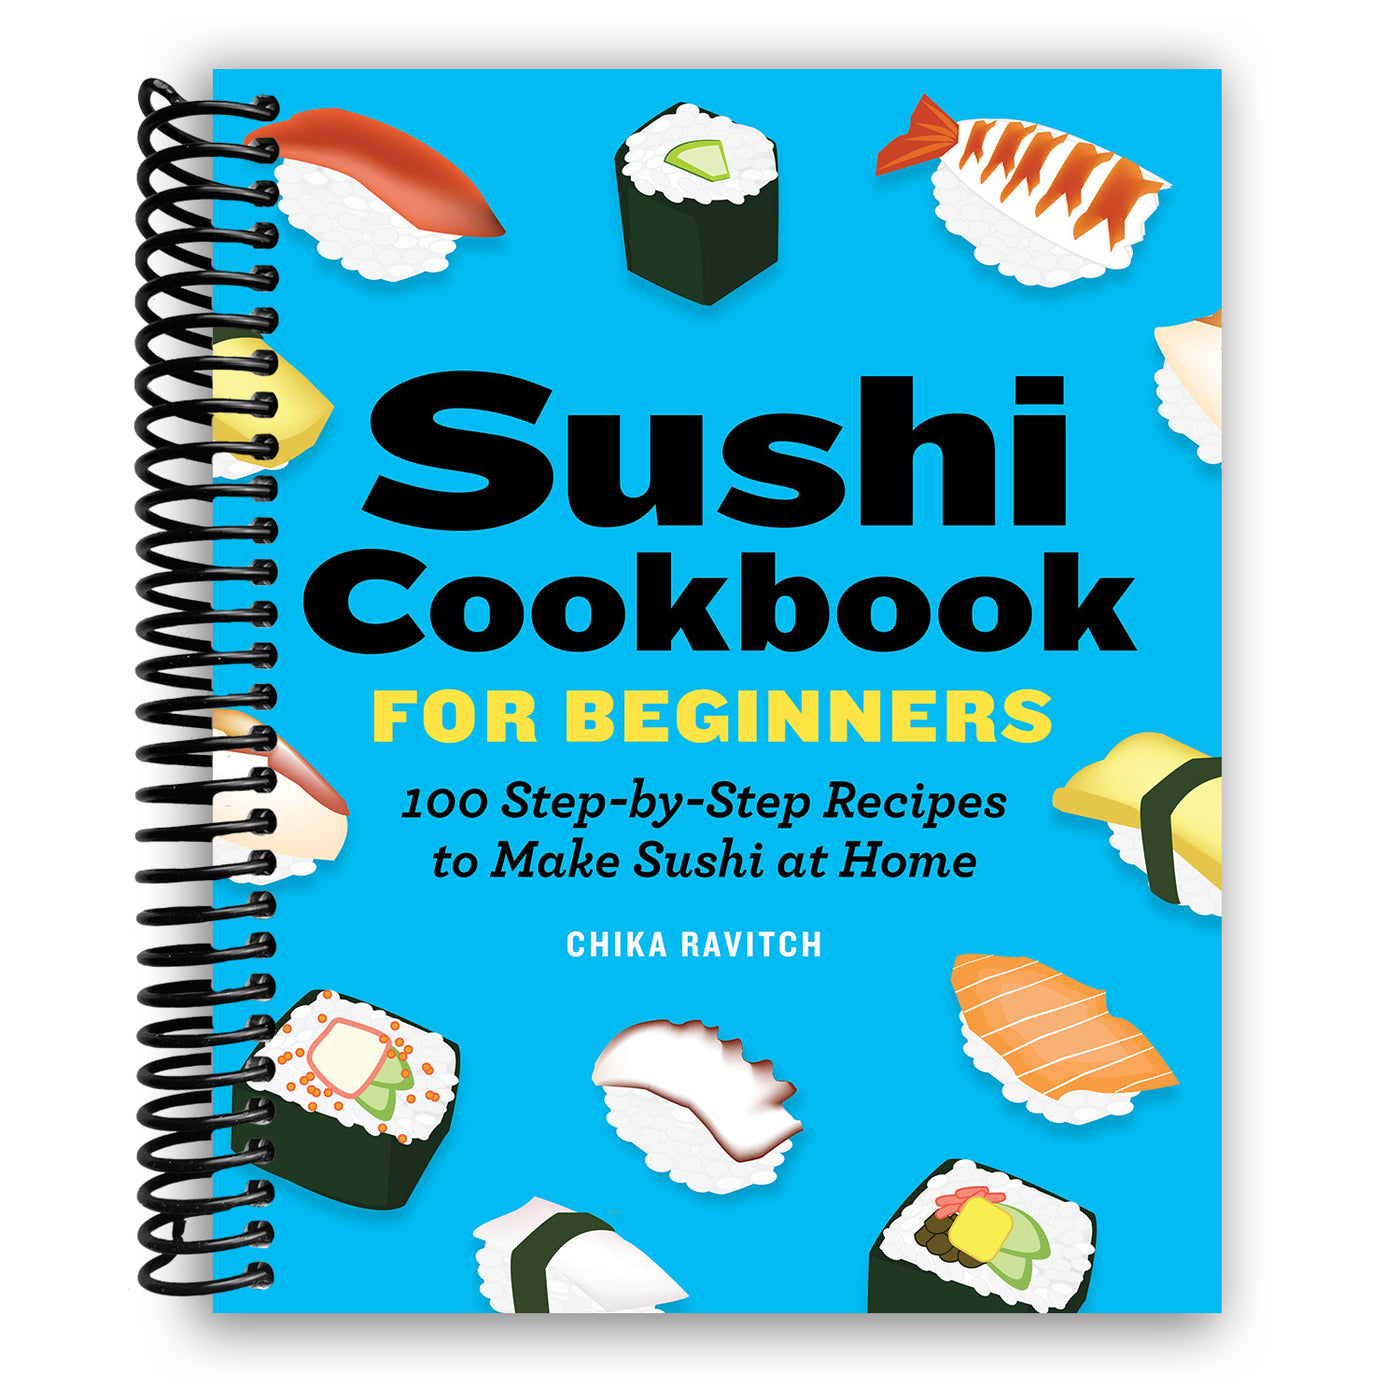 Sushi Cookbook for Beginners: 100 Step-By-Step Recipes to Make Sushi at Home (Spiral Bound)